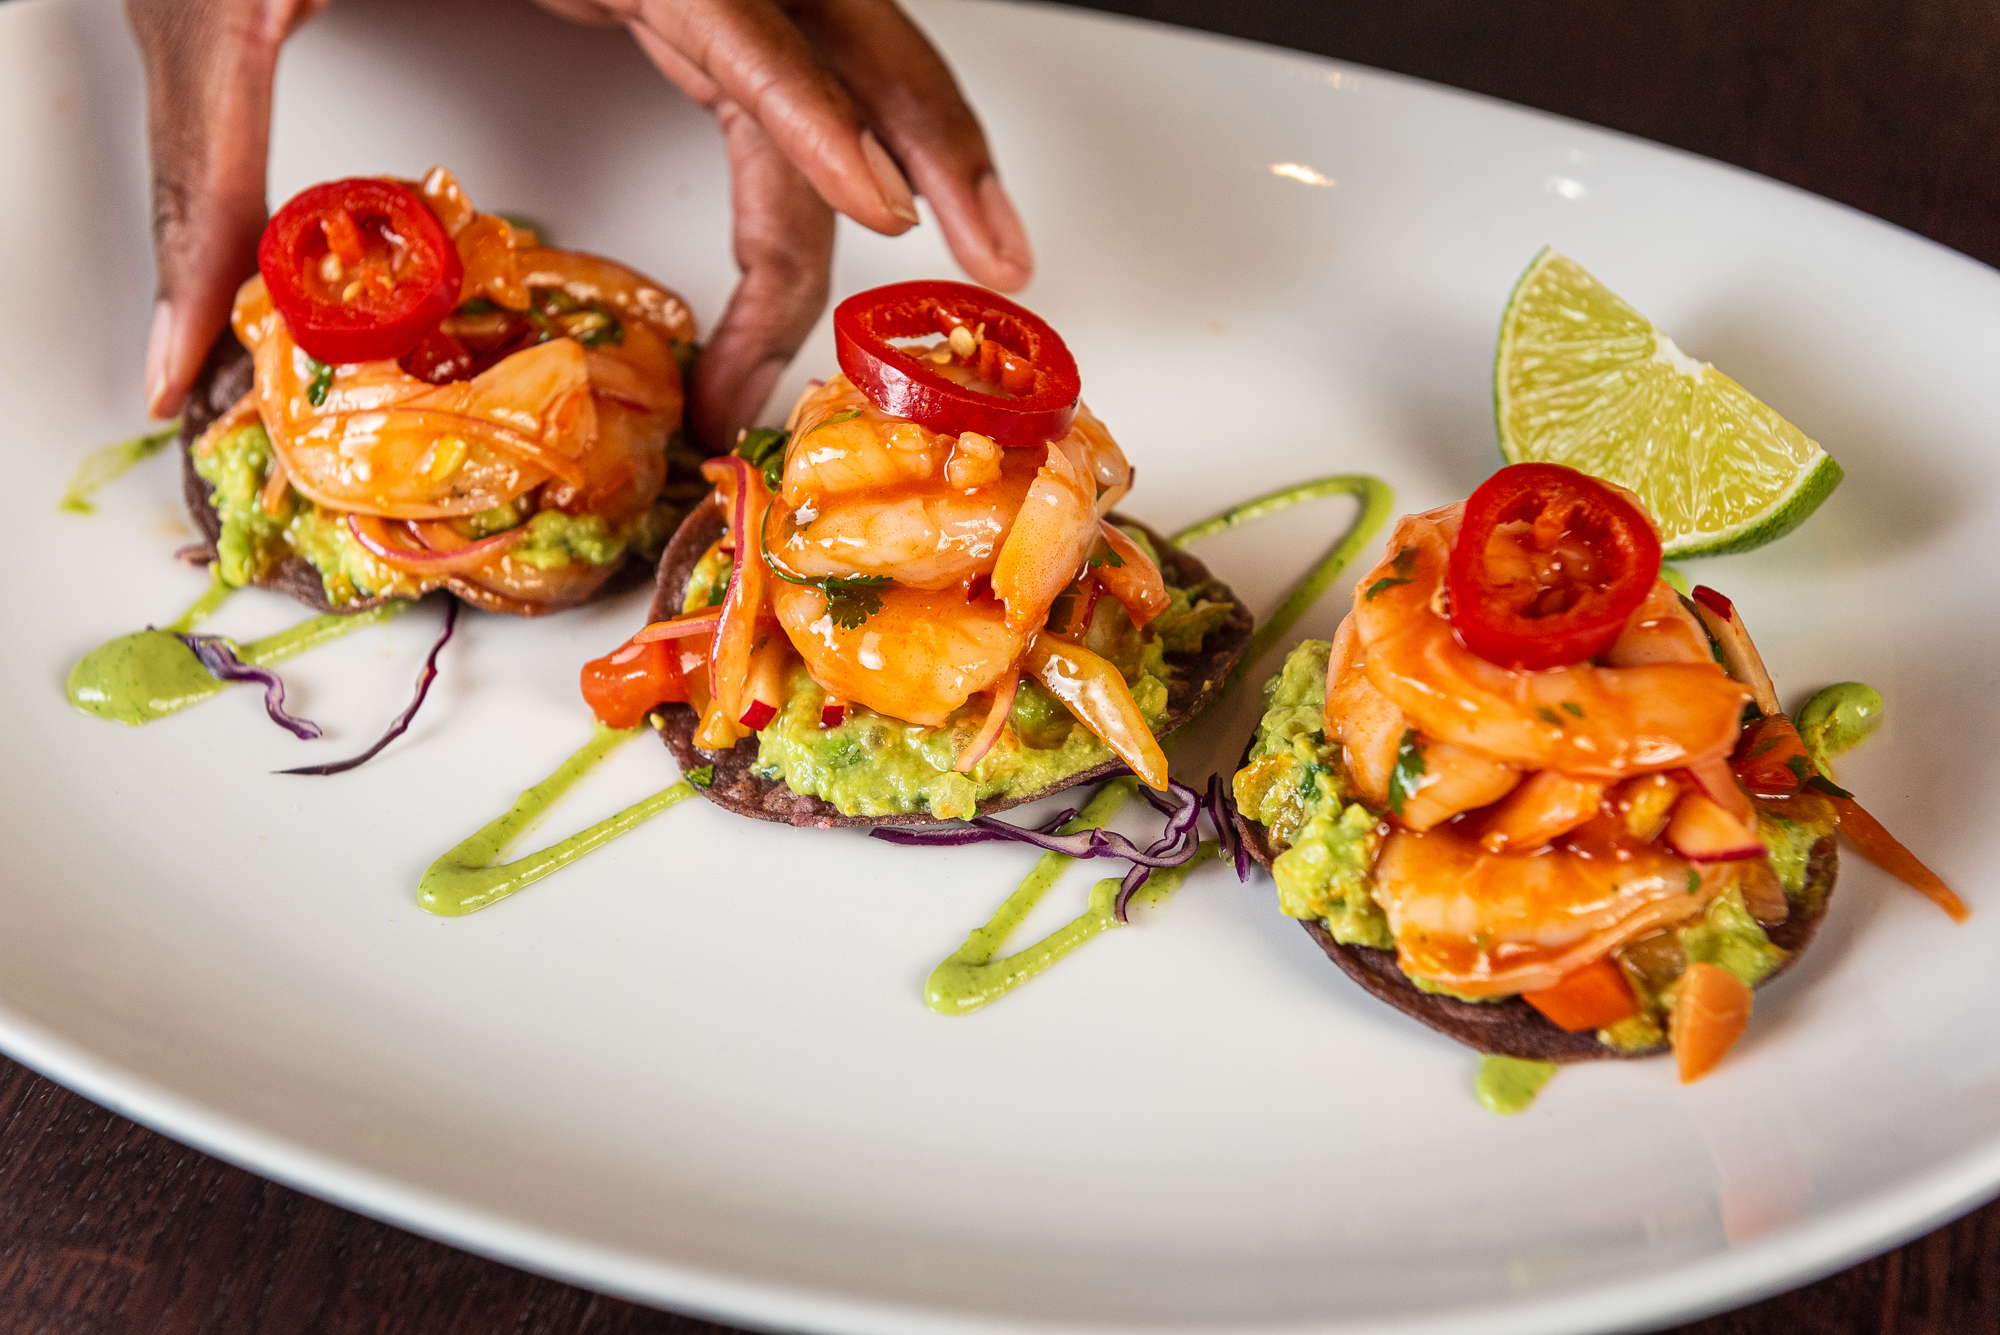 Three Yucatan shrimp tostadas at Anafre are built on blue tortillas with a base of green guacamole on a white plate.